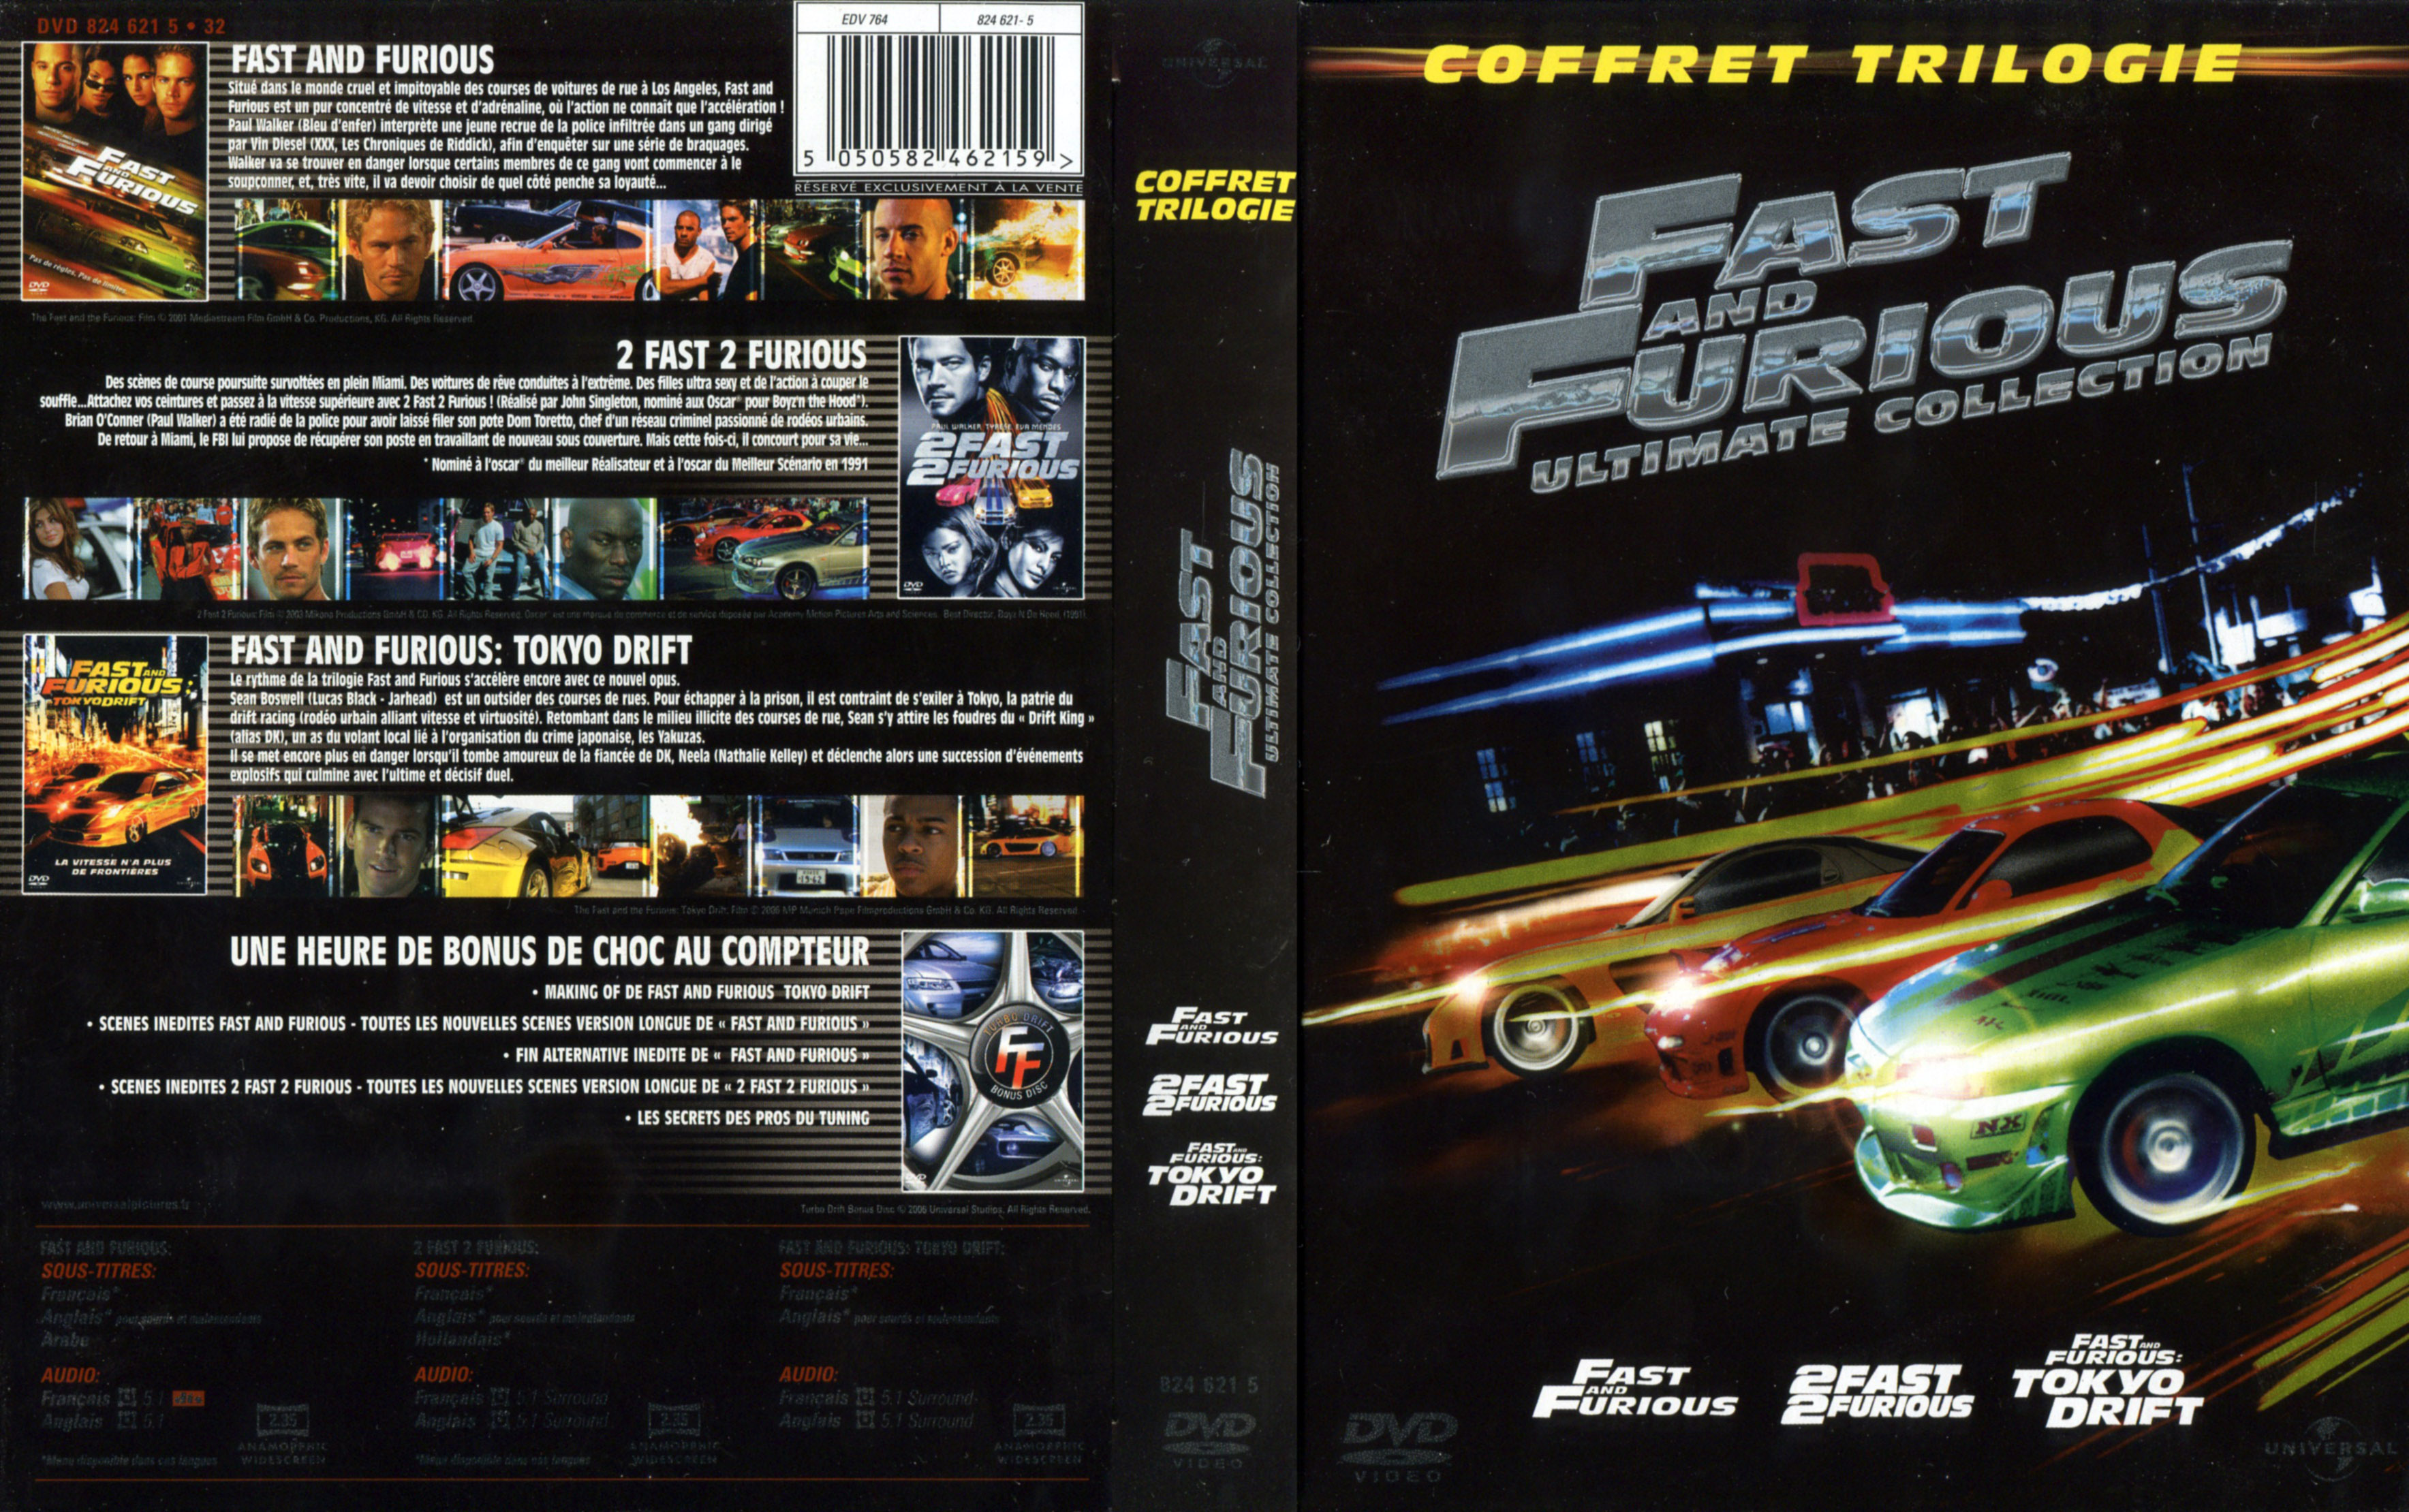 Jaquette DVD Fast and Furious Ultimate Edition v2